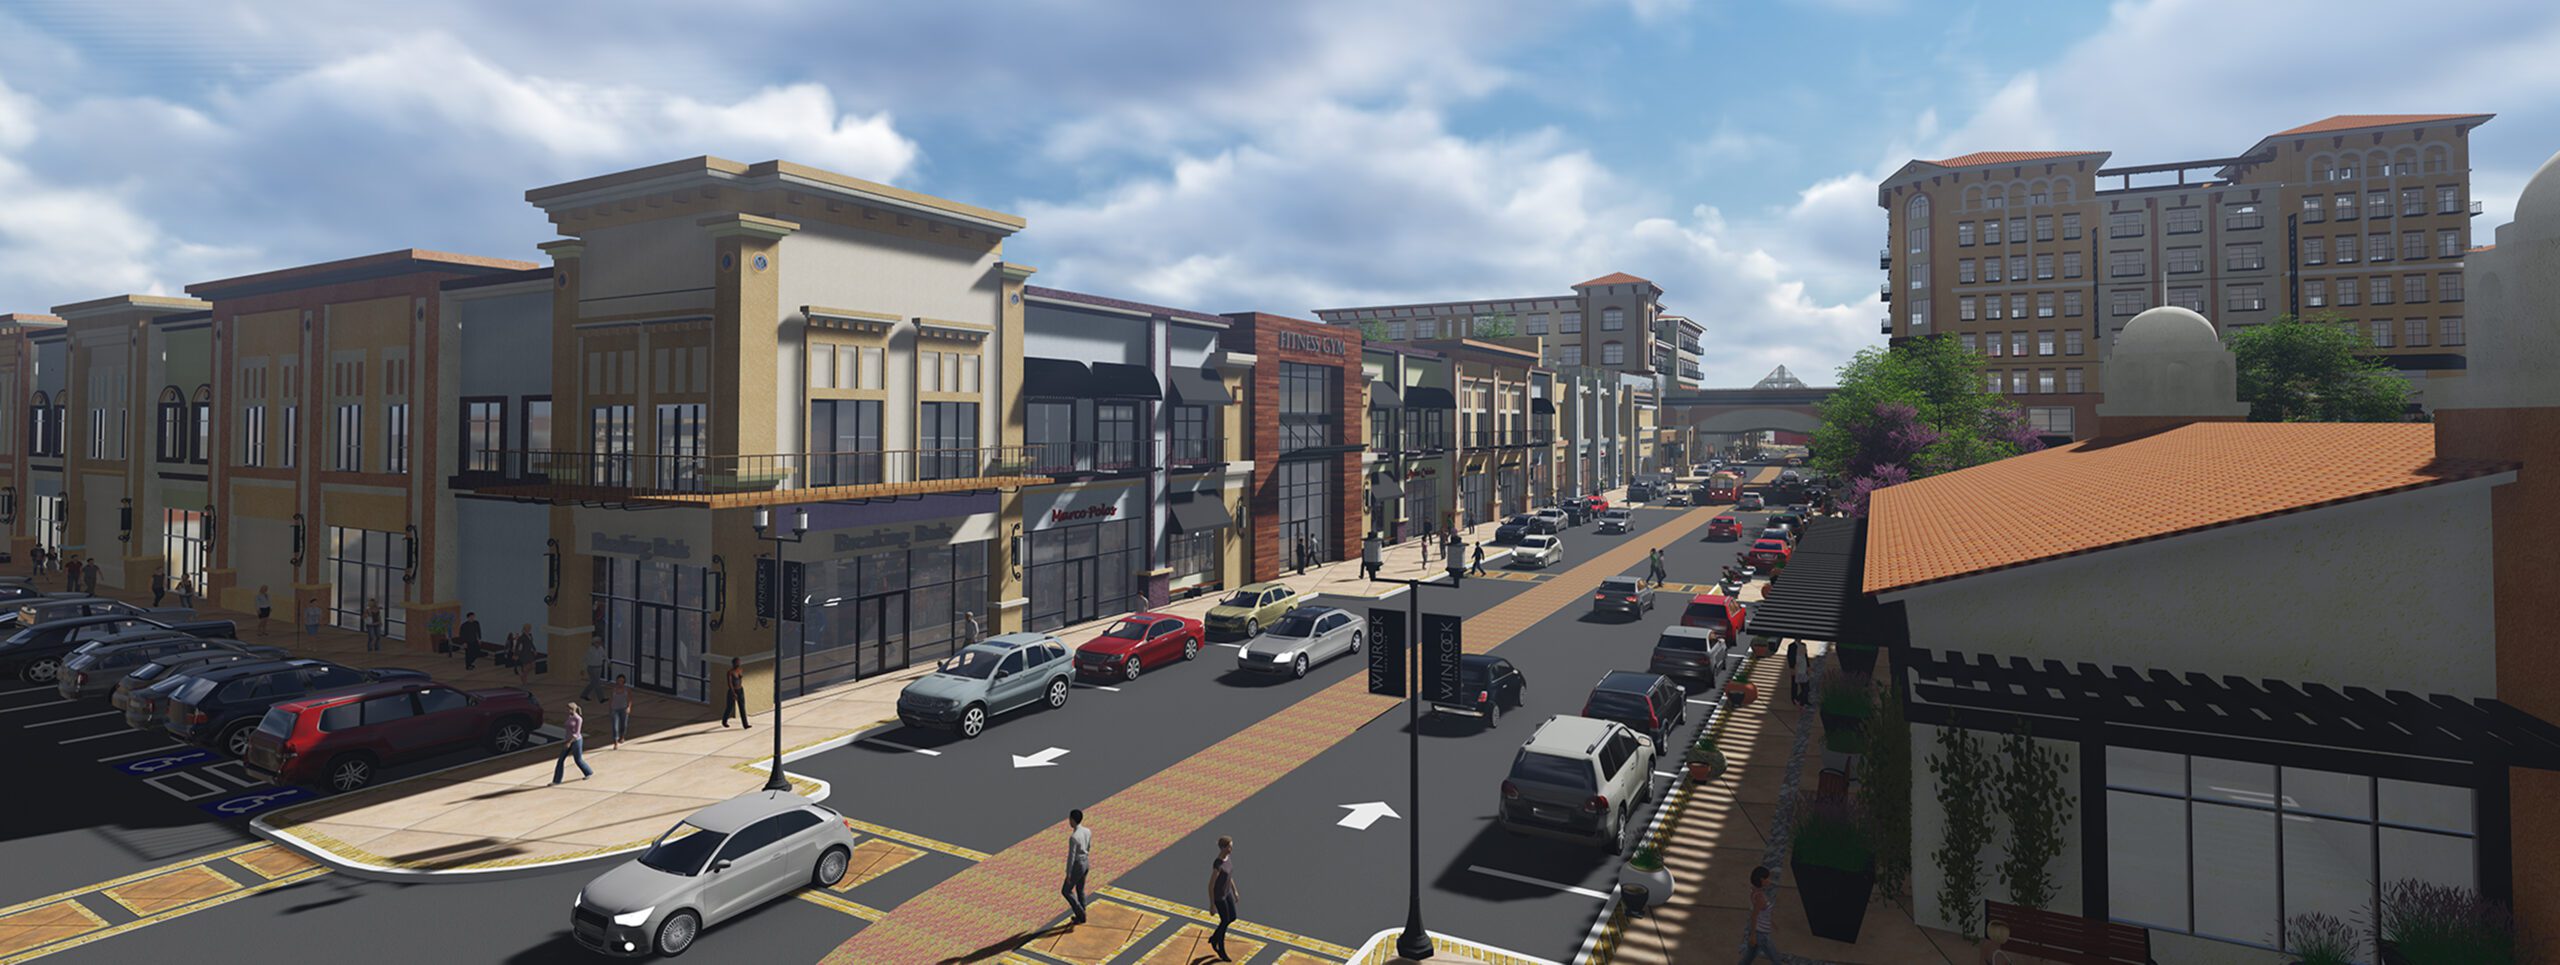 Featured image for “Master Planned Main Street at Winrock Town Center”